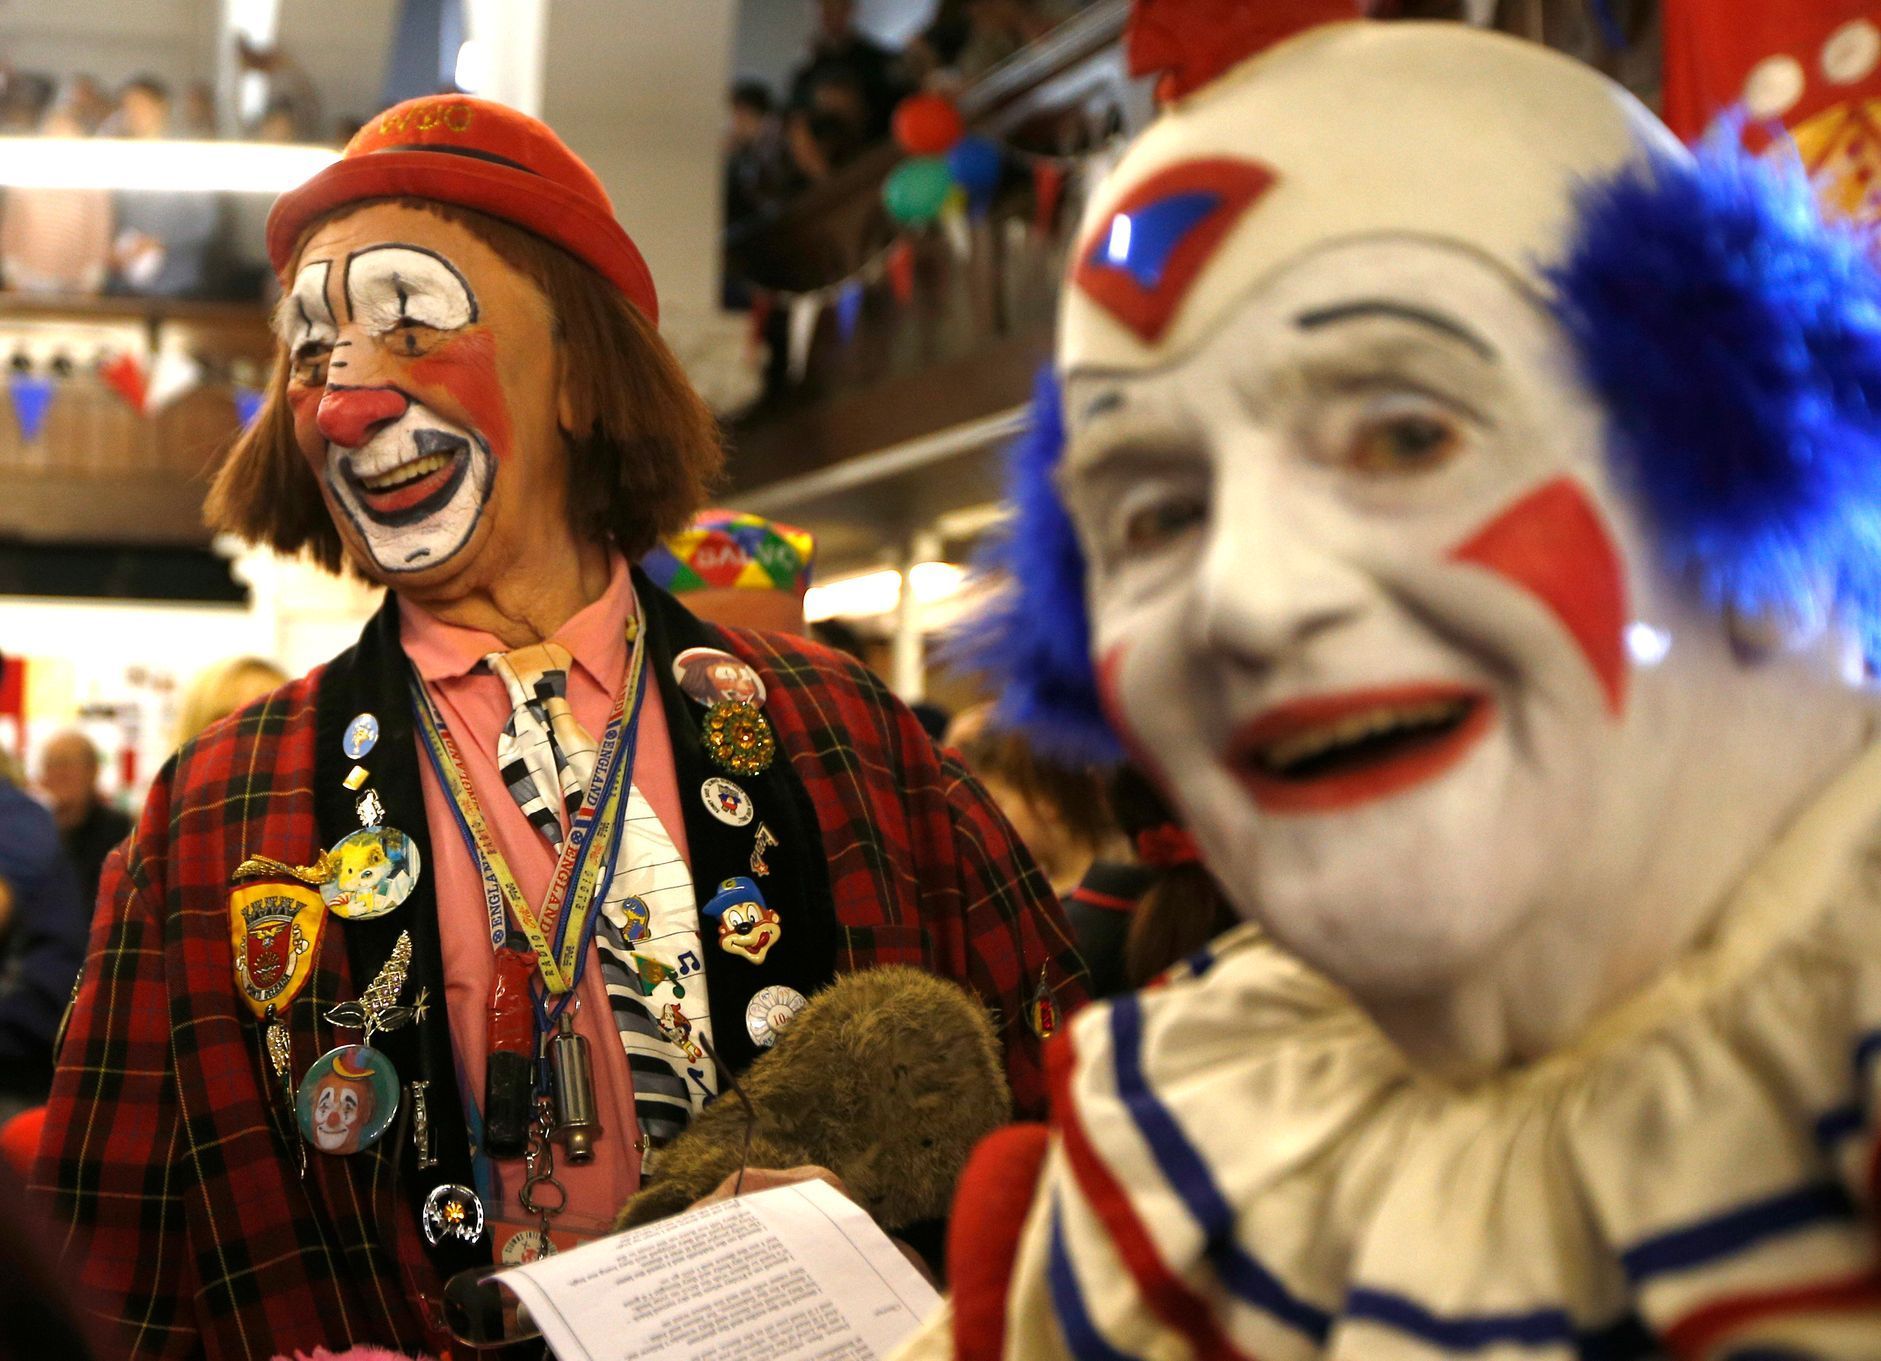 Clowns stand at the pews of the All Saints Church during the Grimaldi clown service in Dalston, north London